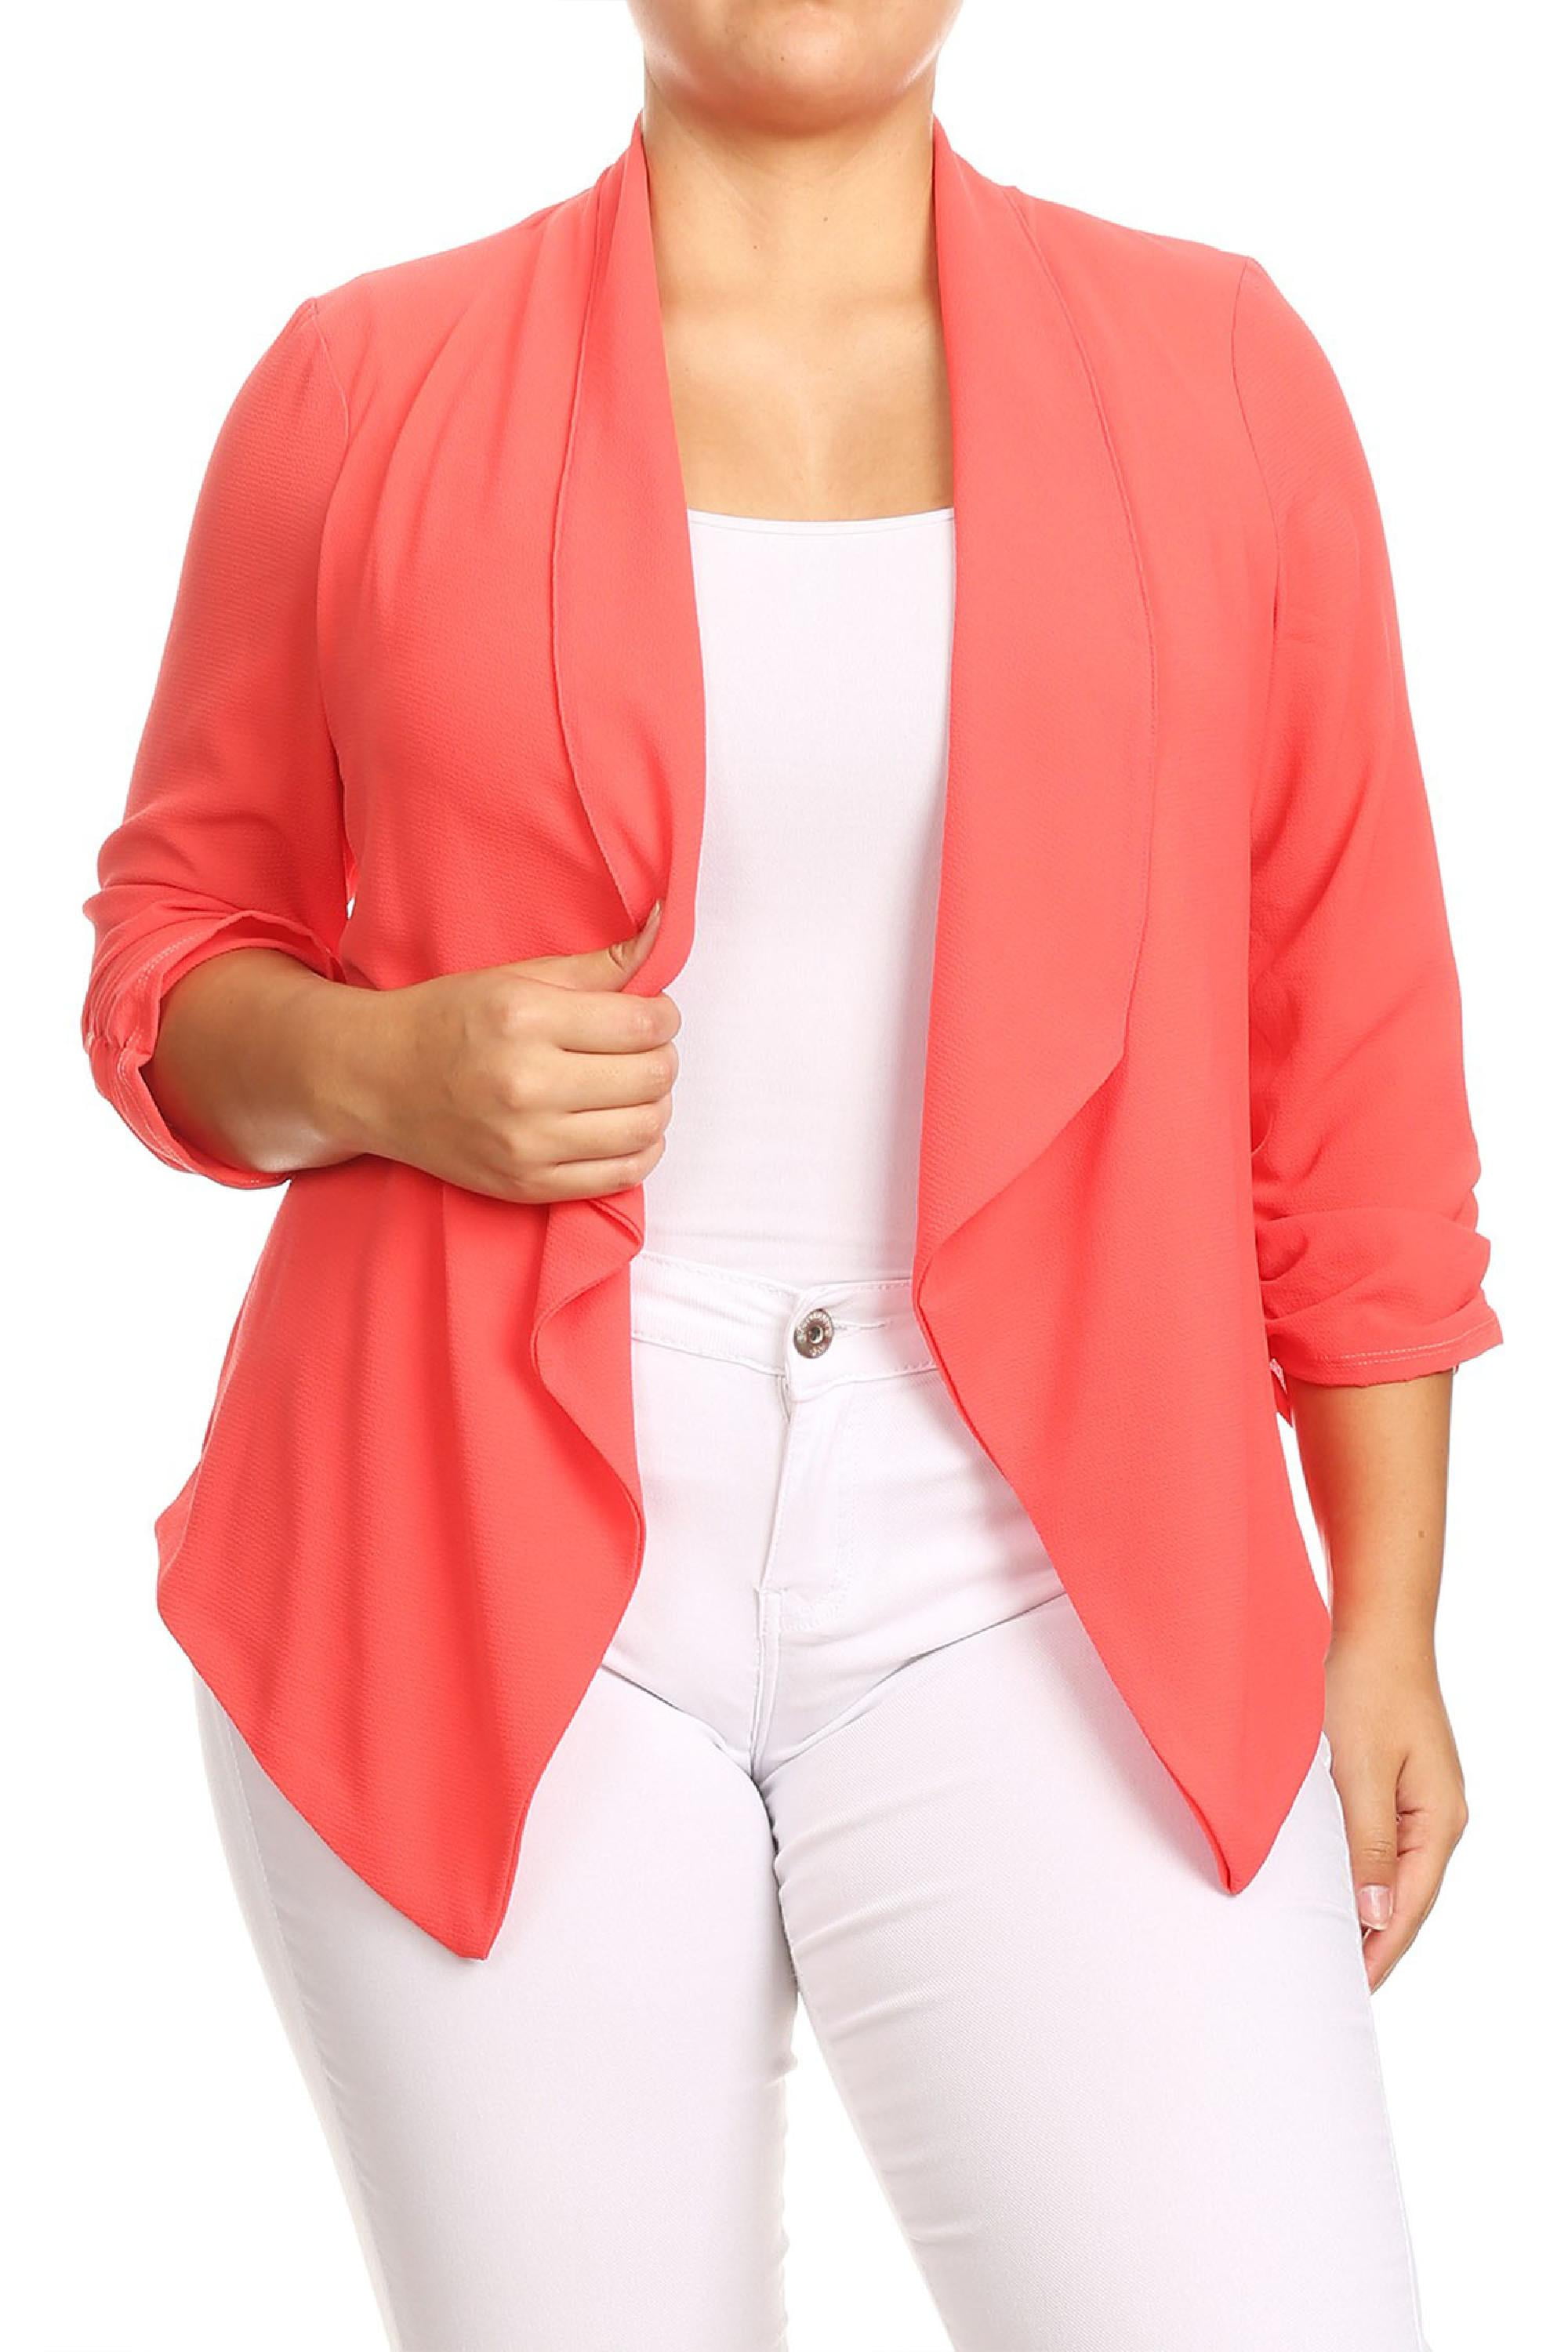 Women's Plus Size Draped Neck Open Loose Fit Solid Jacket Made in - Walmart.com